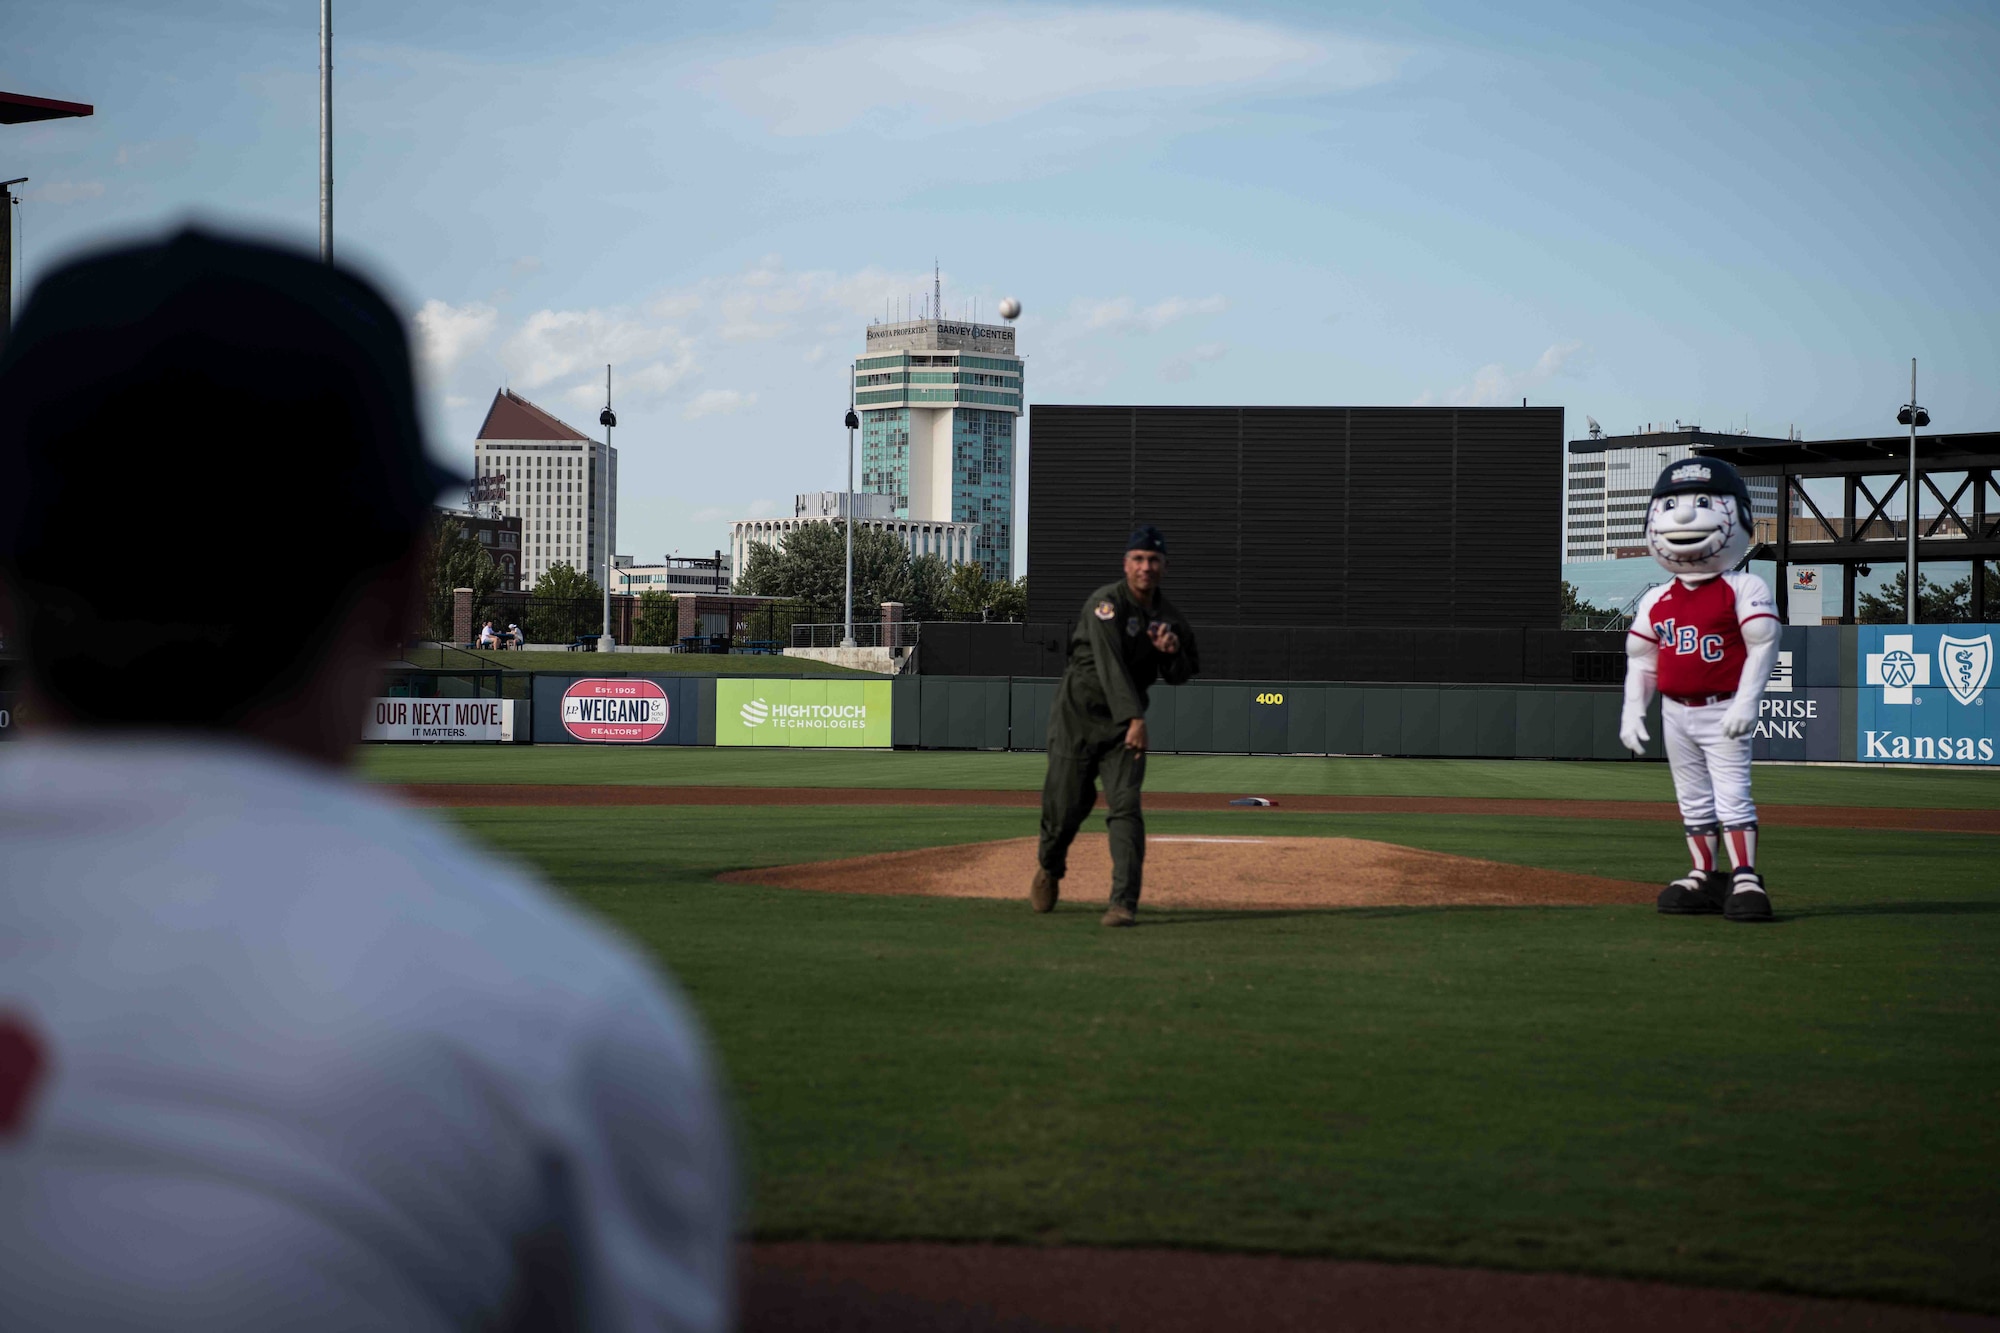 Col. Nate Vogel, 22nd Air Refueling Wing commander, throws the first pitch at a National Baseball Congress World Series ball game, Aug. 19, 2021, in Wichita, Kansas. Vogel was invited to throw the first pitch as a guest for Armed Forces Appreciation Night at Riverfront Stadium. (U.S. Air Force photo by Senior Airman Marc A. Garcia)